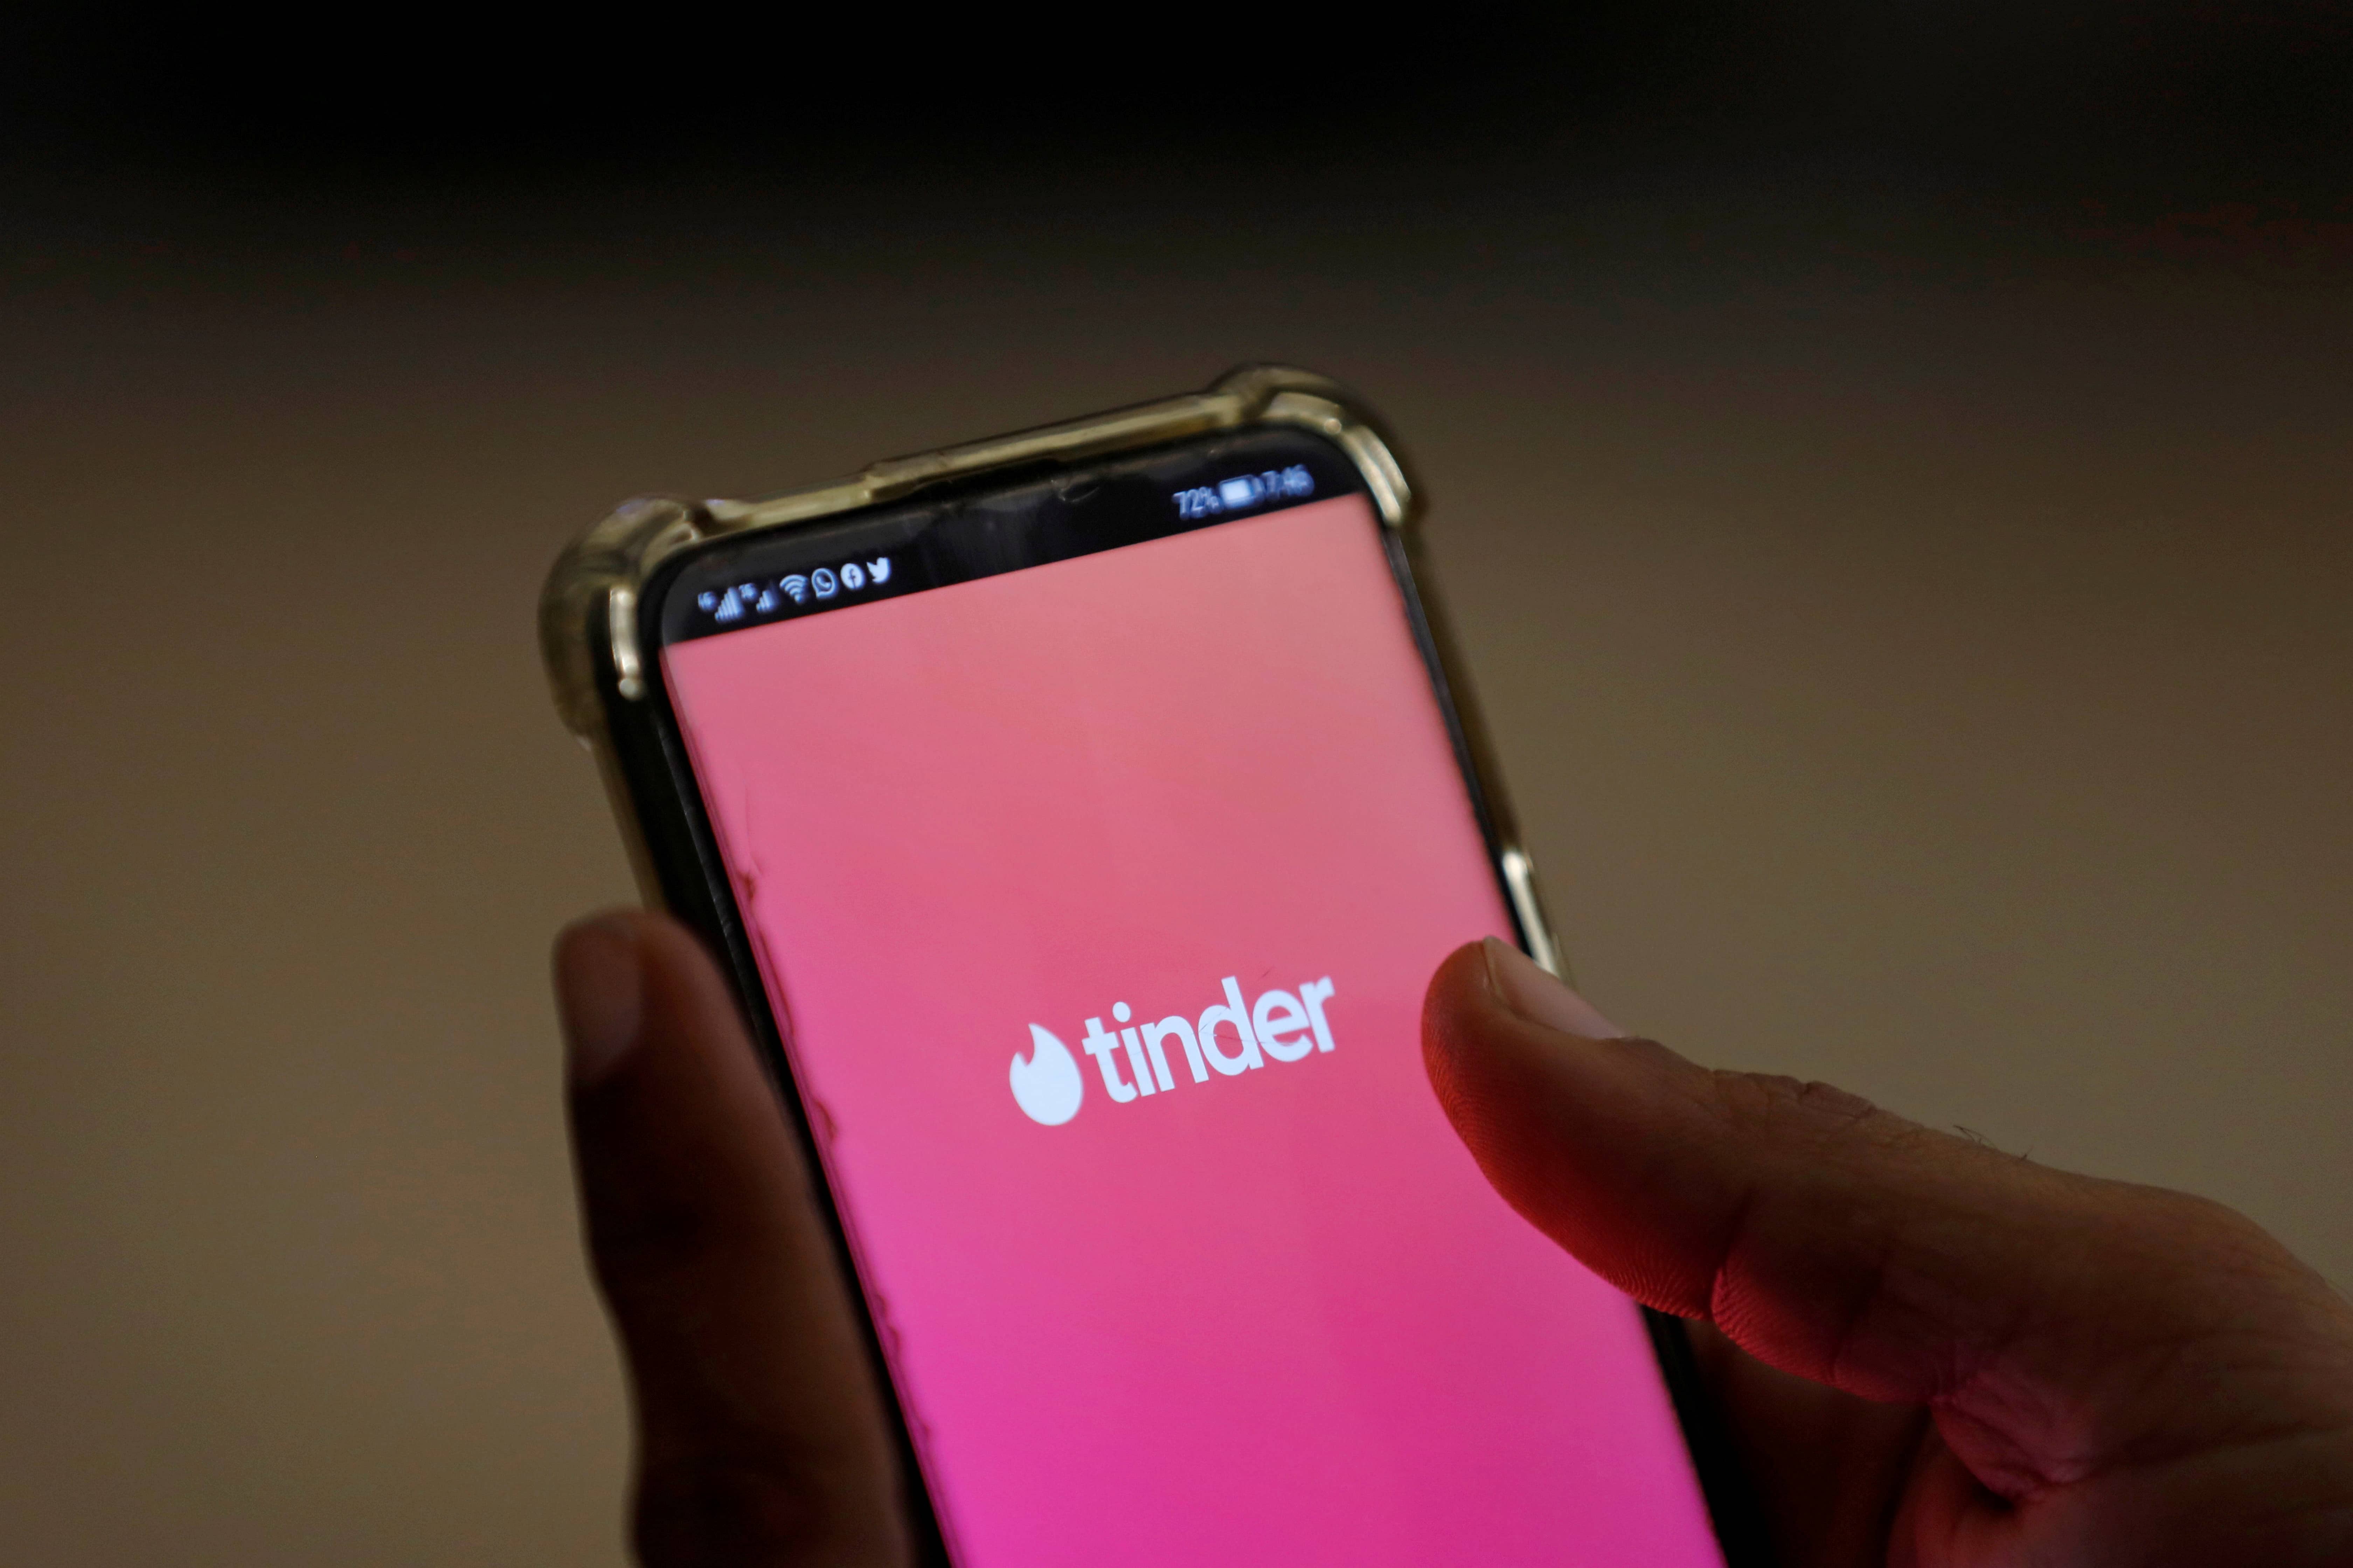 file-photo-the-dating-app-tinder-is-shown-on-a-mobile-phone-in-this-picture-illustration